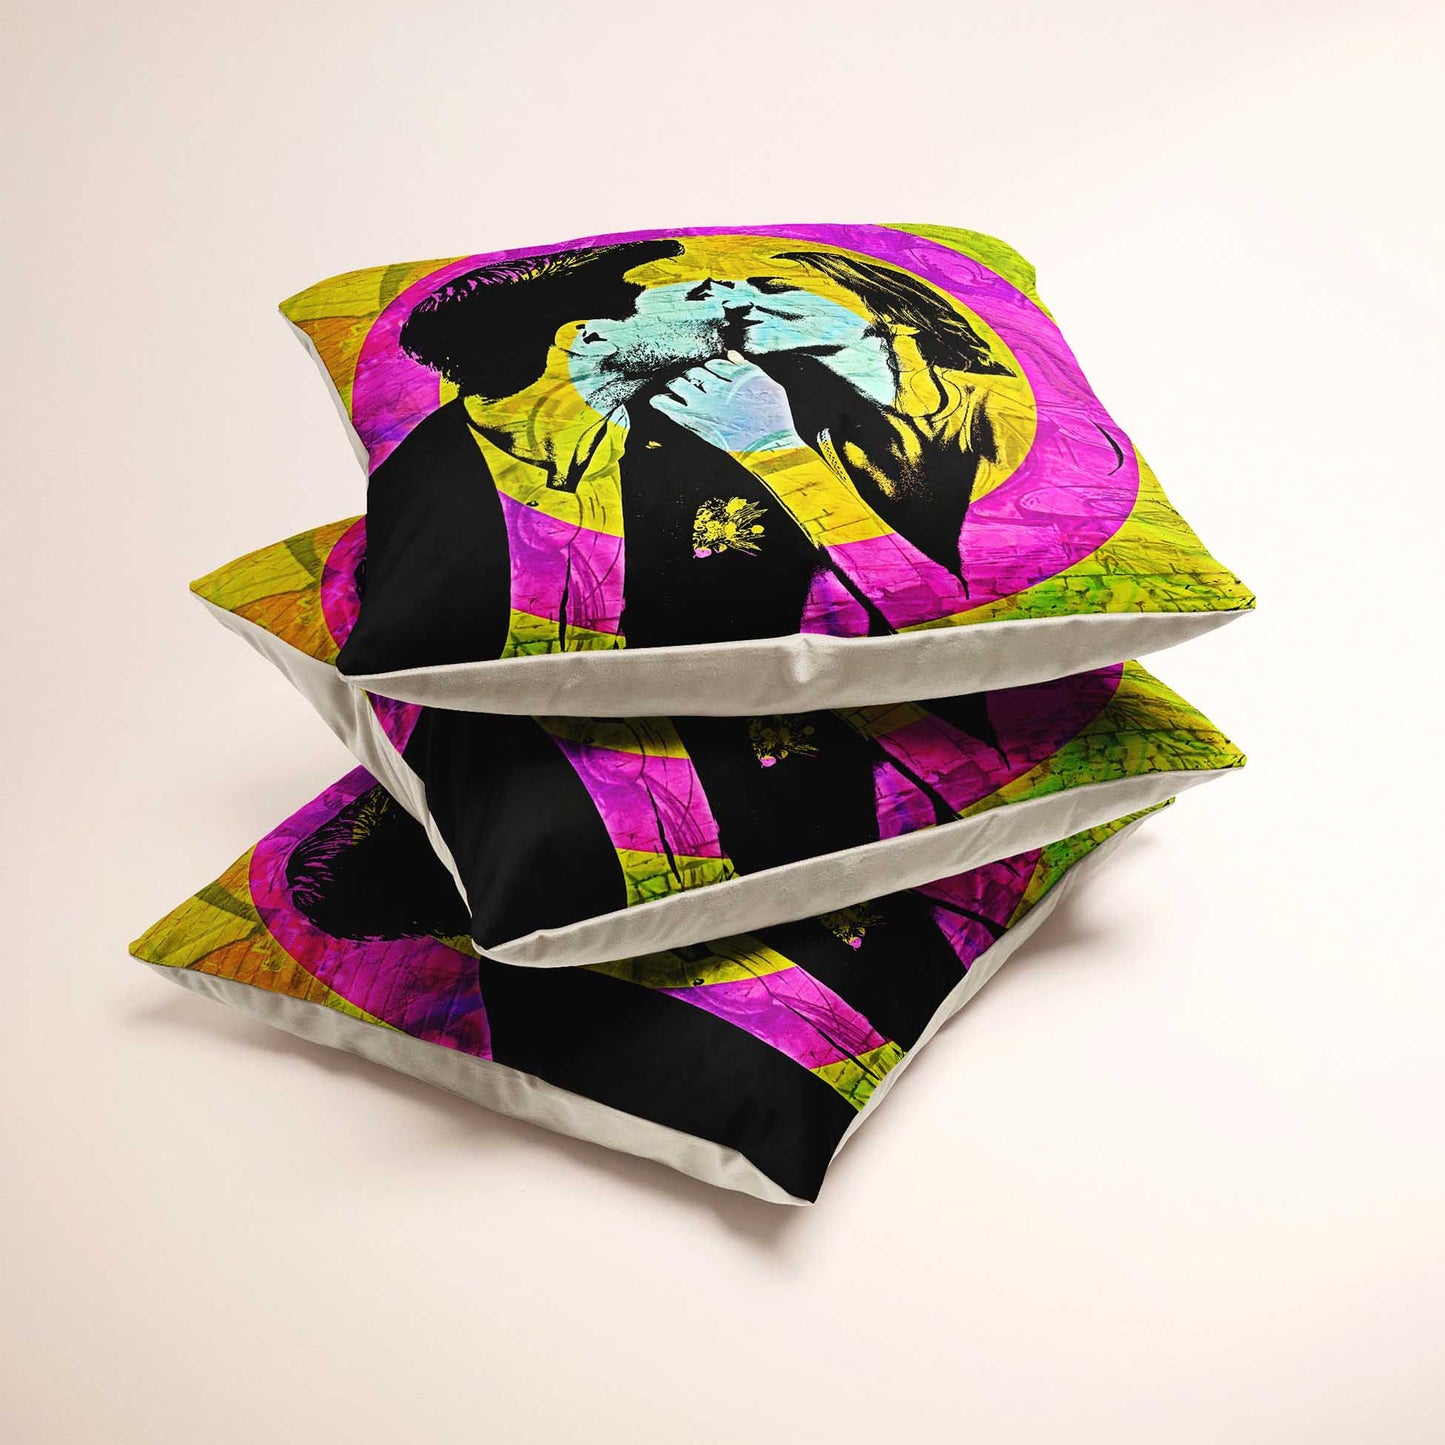 Make a bold statement with the Personalised Graffiti Street Art Cushion, a vibrant and colorful addition to your home decor. Printed from your photo, this cushion captures the urban energy and creativity of street art, luxury feel